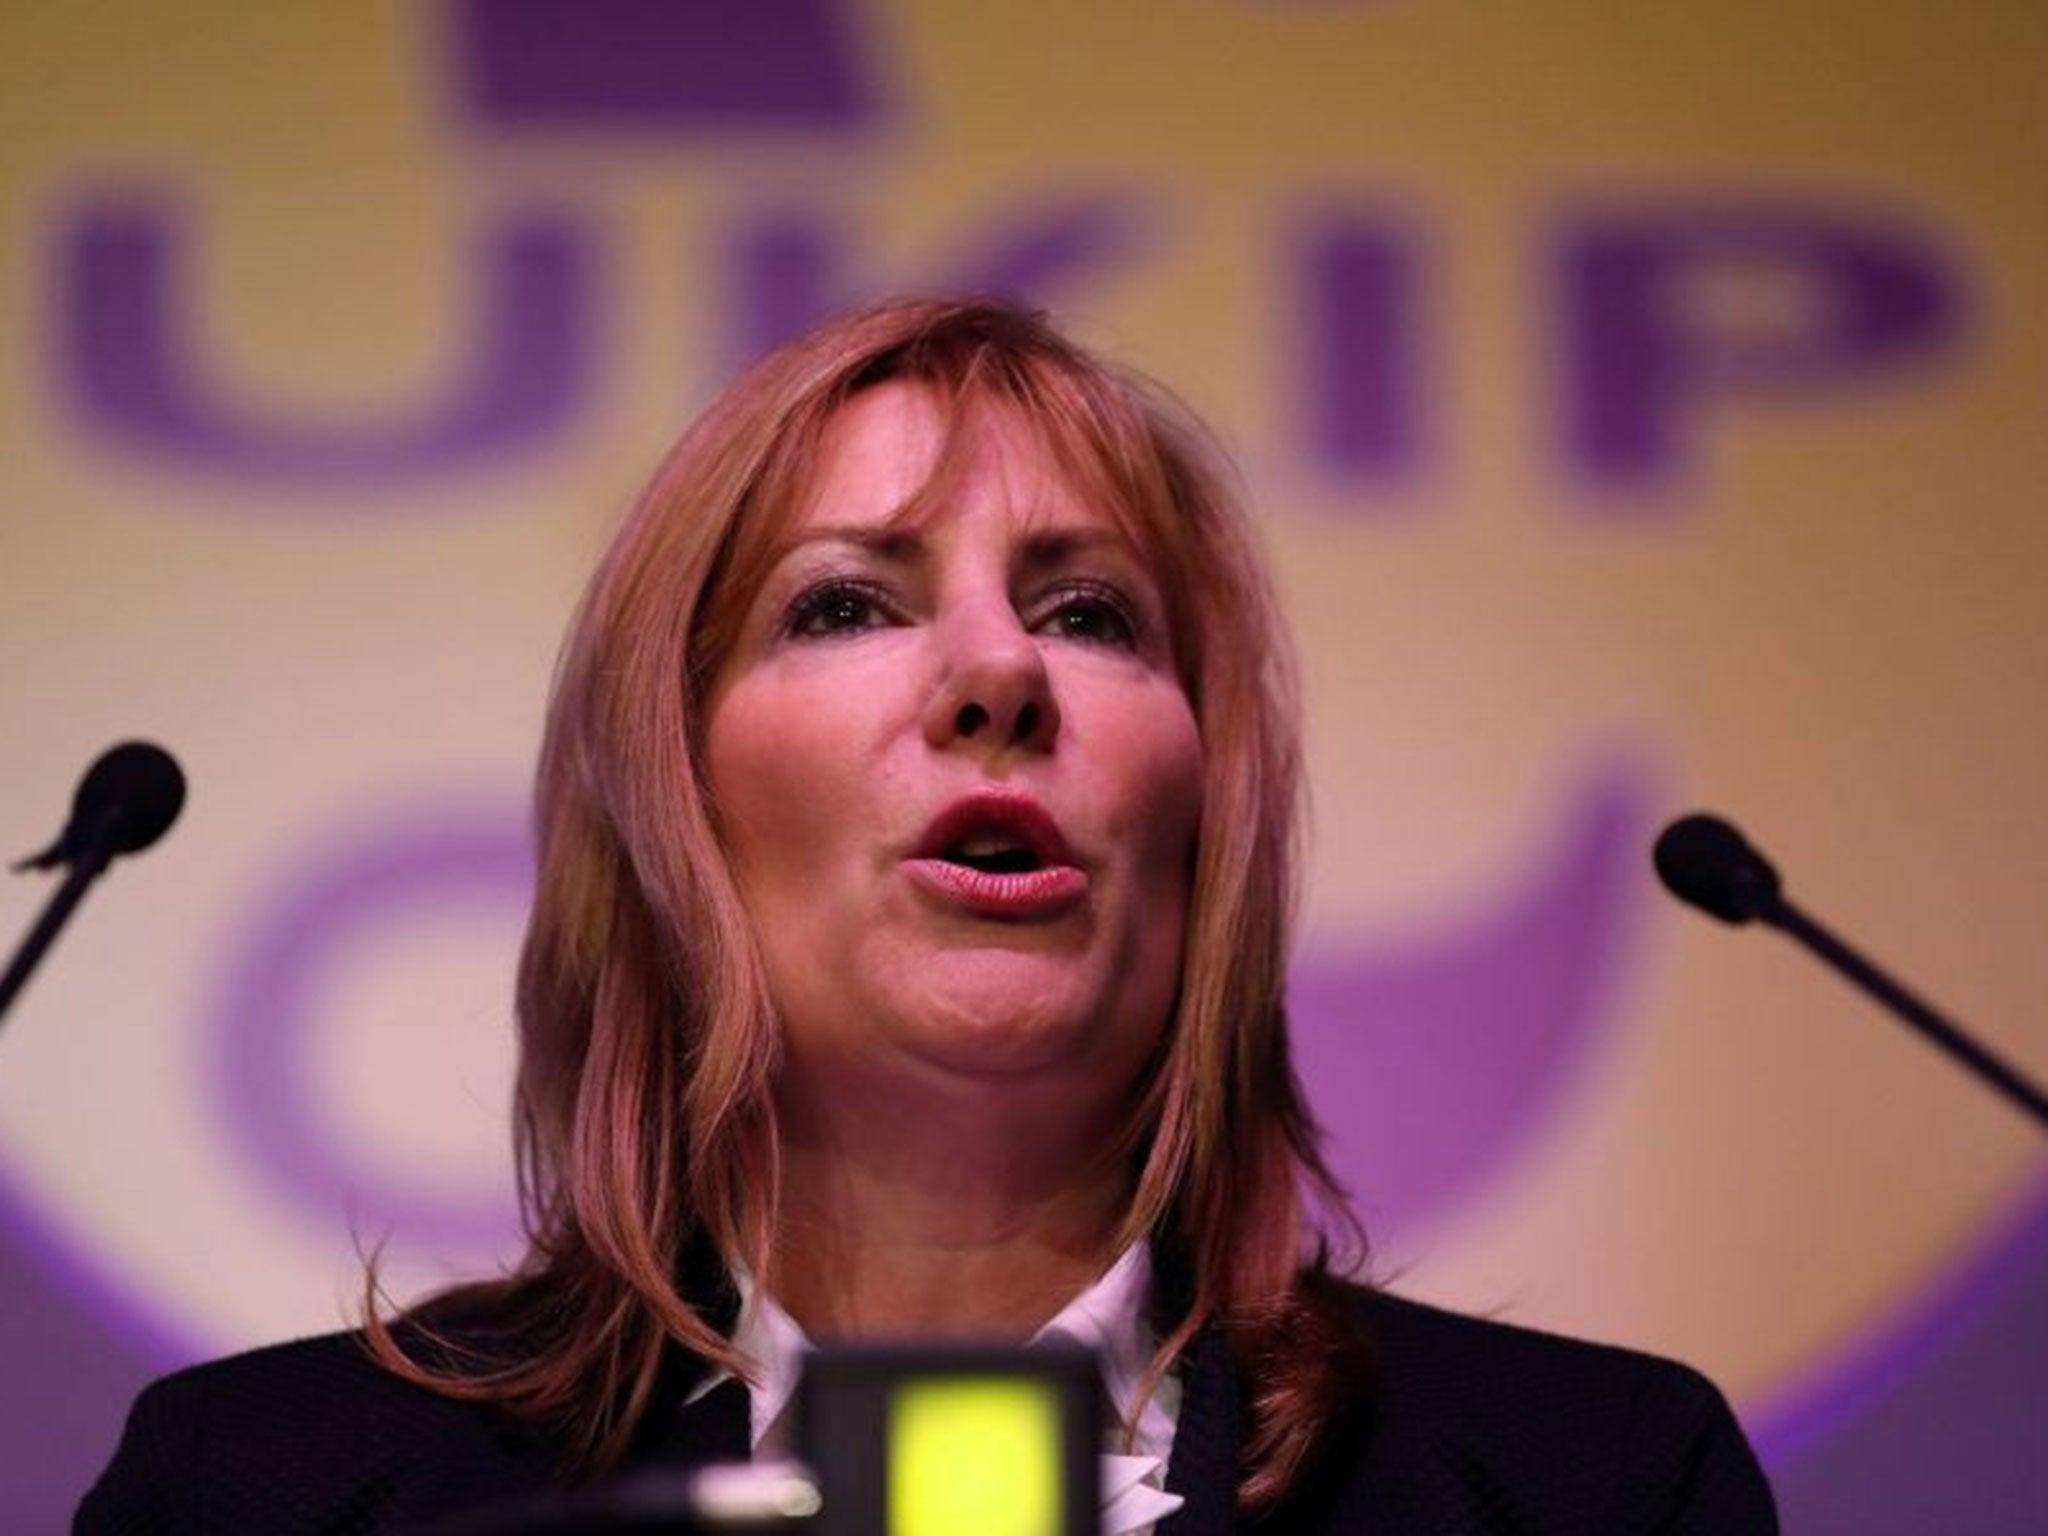 Janice Atkinson as the MEP has been expelled by Ukip for bringing the party into disrepute over claims about inflated expenses, a party spokesman said.